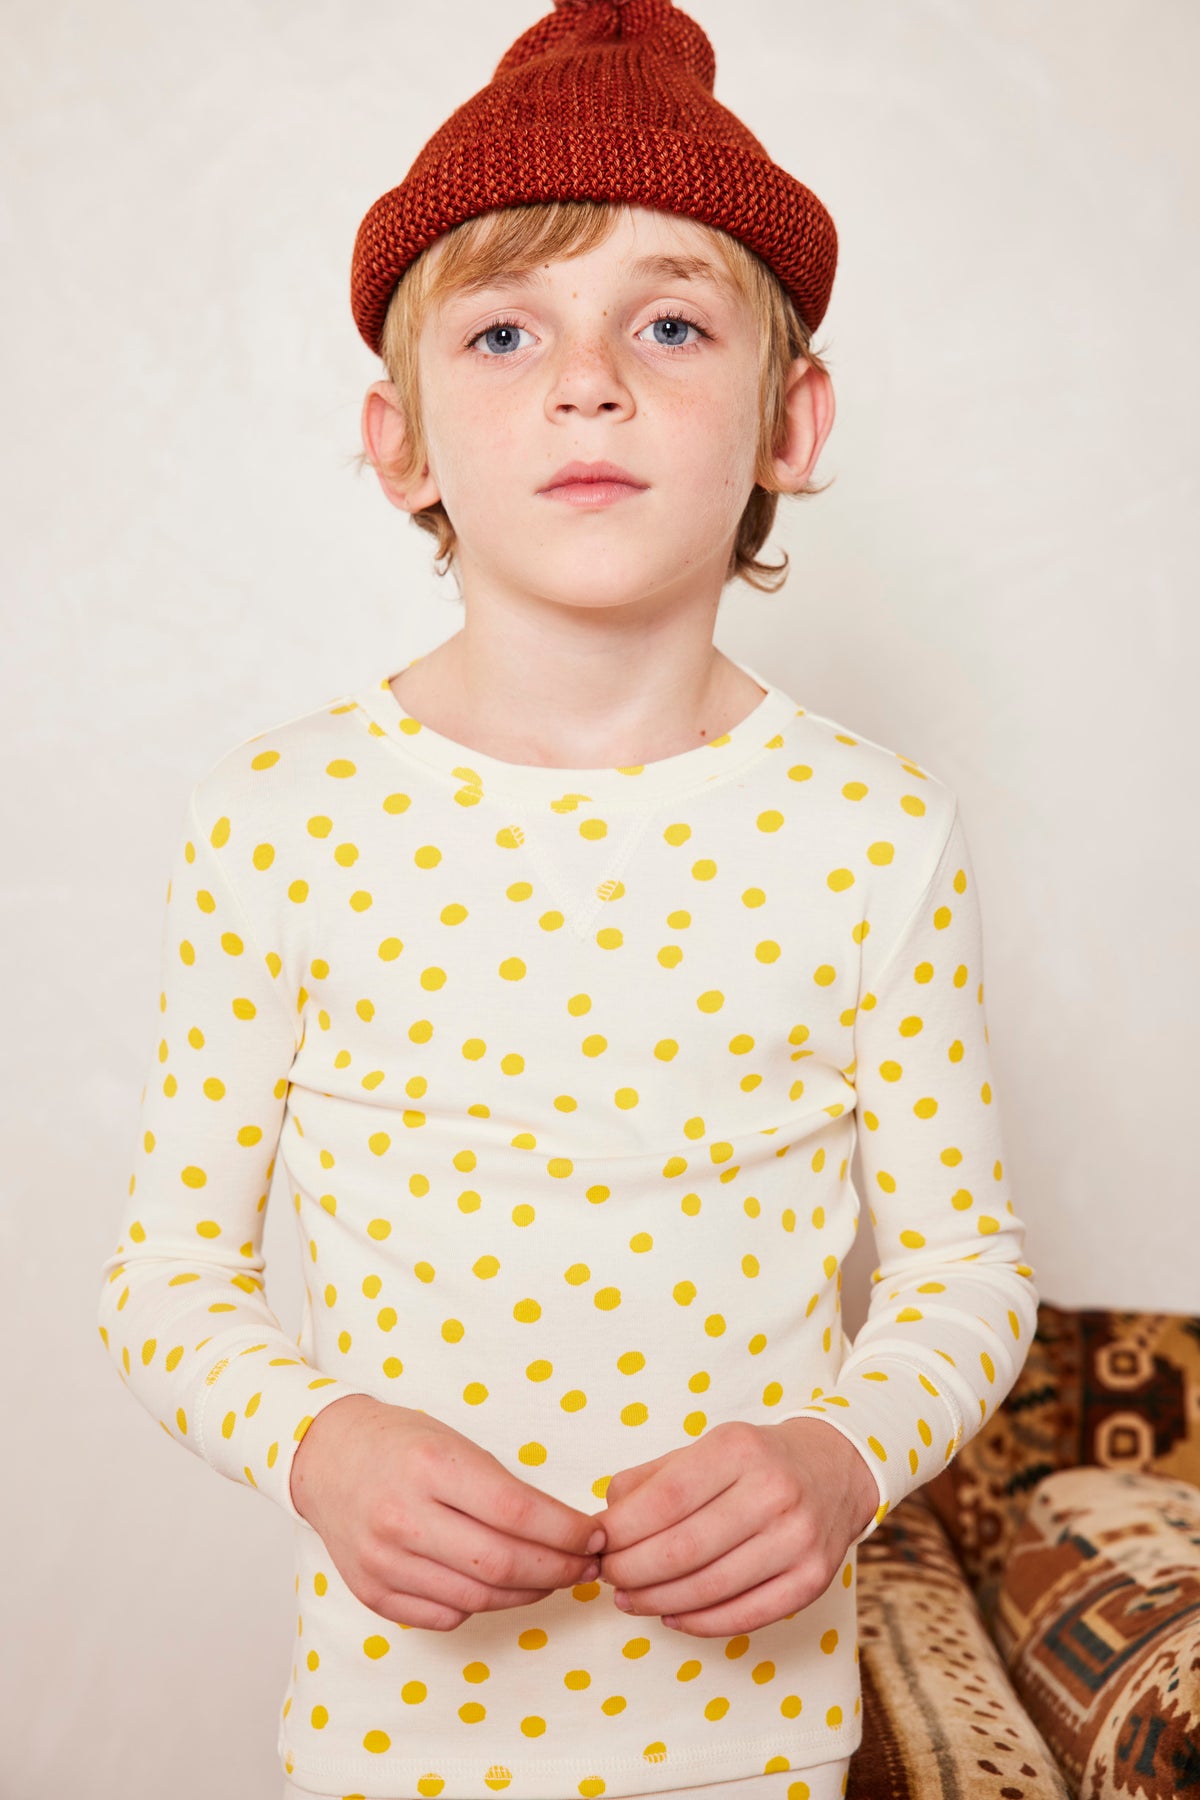 Pajama Set - Winter Cream Polka Dot+Model is 47 inches tall, 45lbs, wearing a size 6-7y